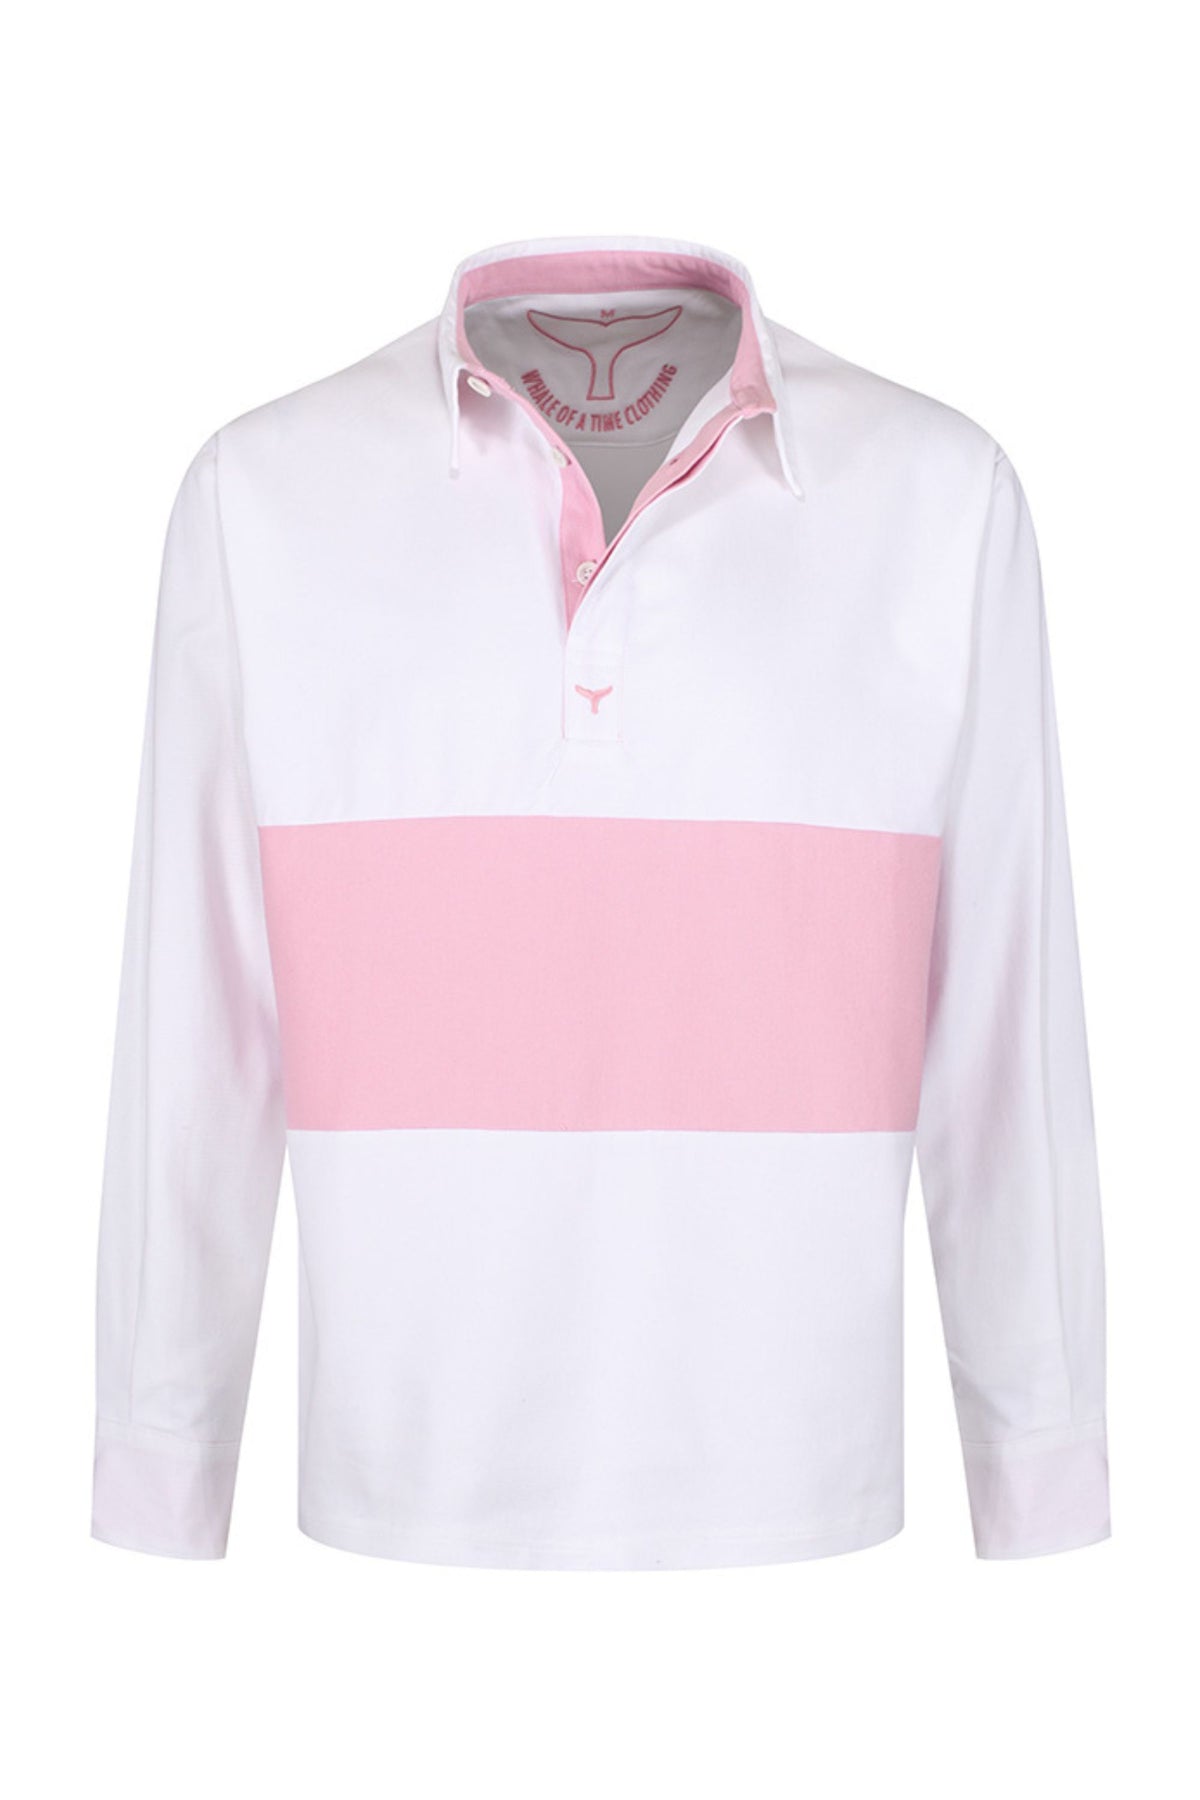 Padstow Unisex Deck Shirt - White - Whale Of A Time Clothing